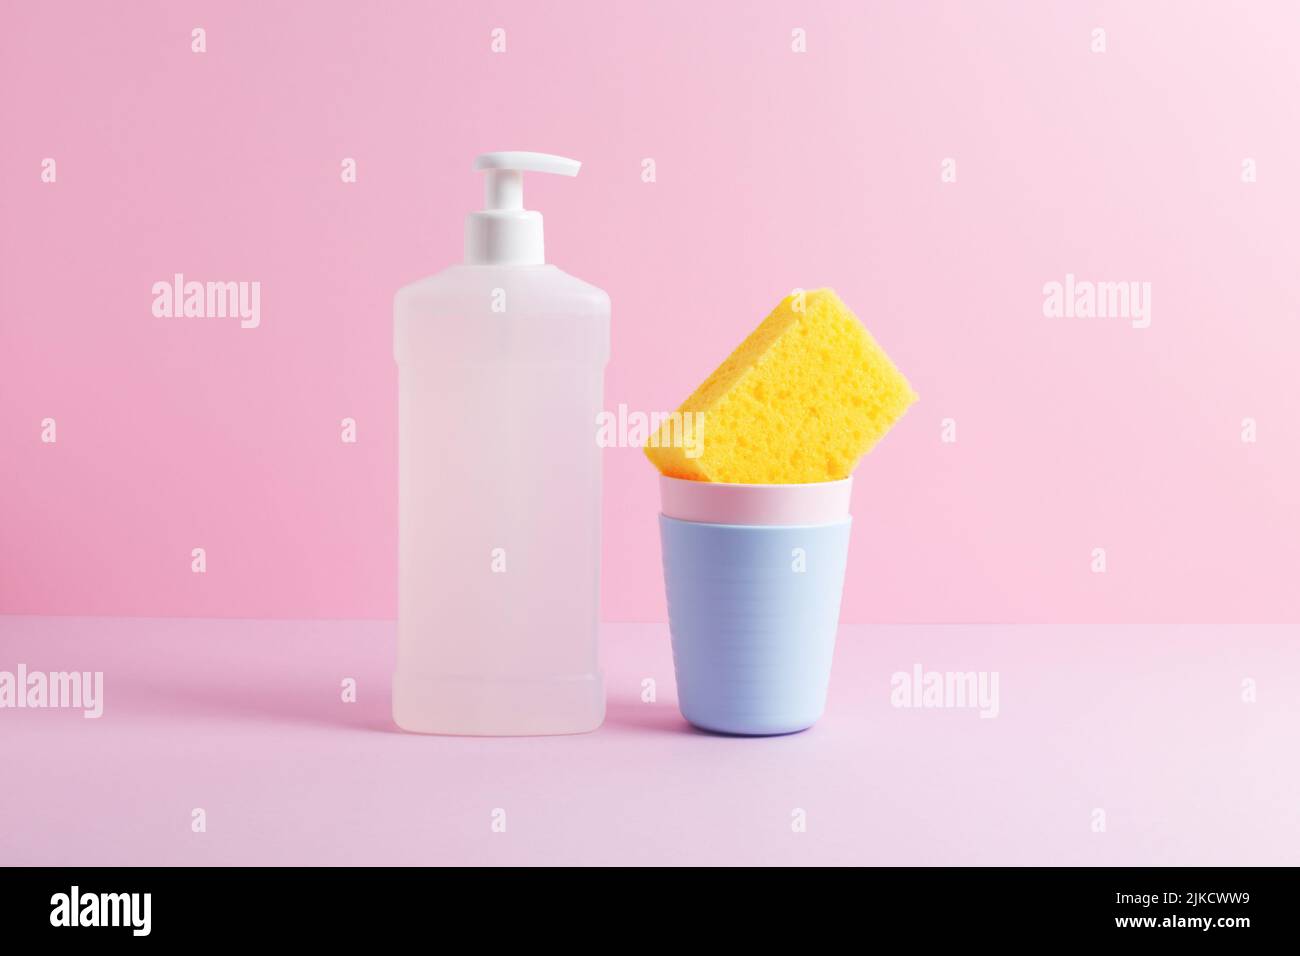 https://c8.alamy.com/comp/2JKCWW9/creative-still-life-with-dishwashing-supplies-white-bottle-of-dishwash-liquid-and-yellow-kitchen-cleaning-sponge-in-stack-of-plastic-cups-front-view-2JKCWW9.jpg